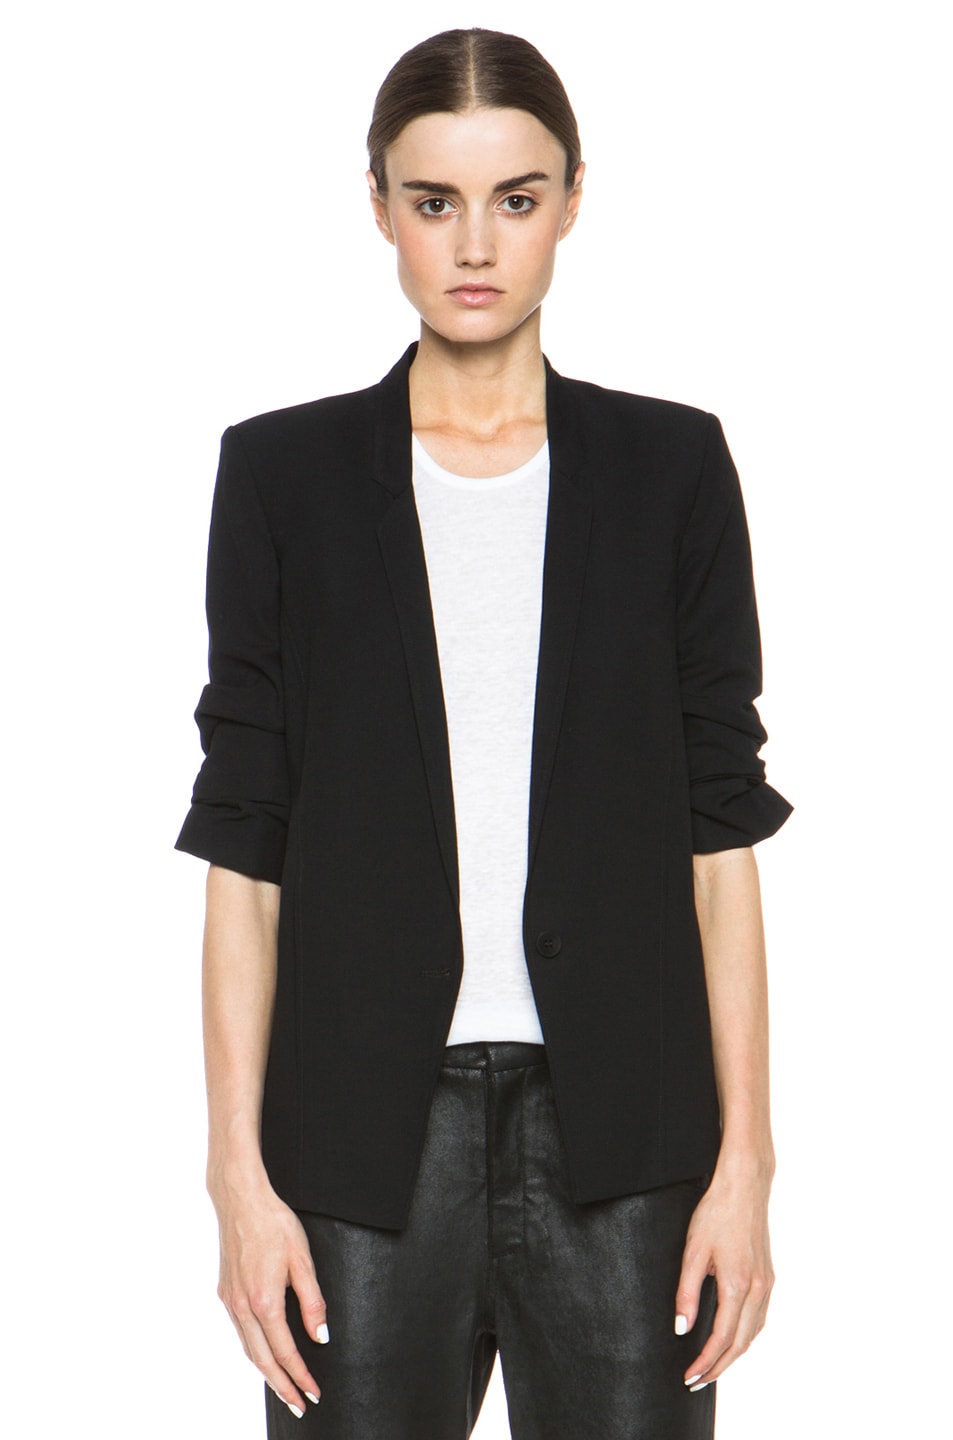 Helmut Lang Slouchy Suiting Scrunched Sleeve Blazer in Black | FWRD